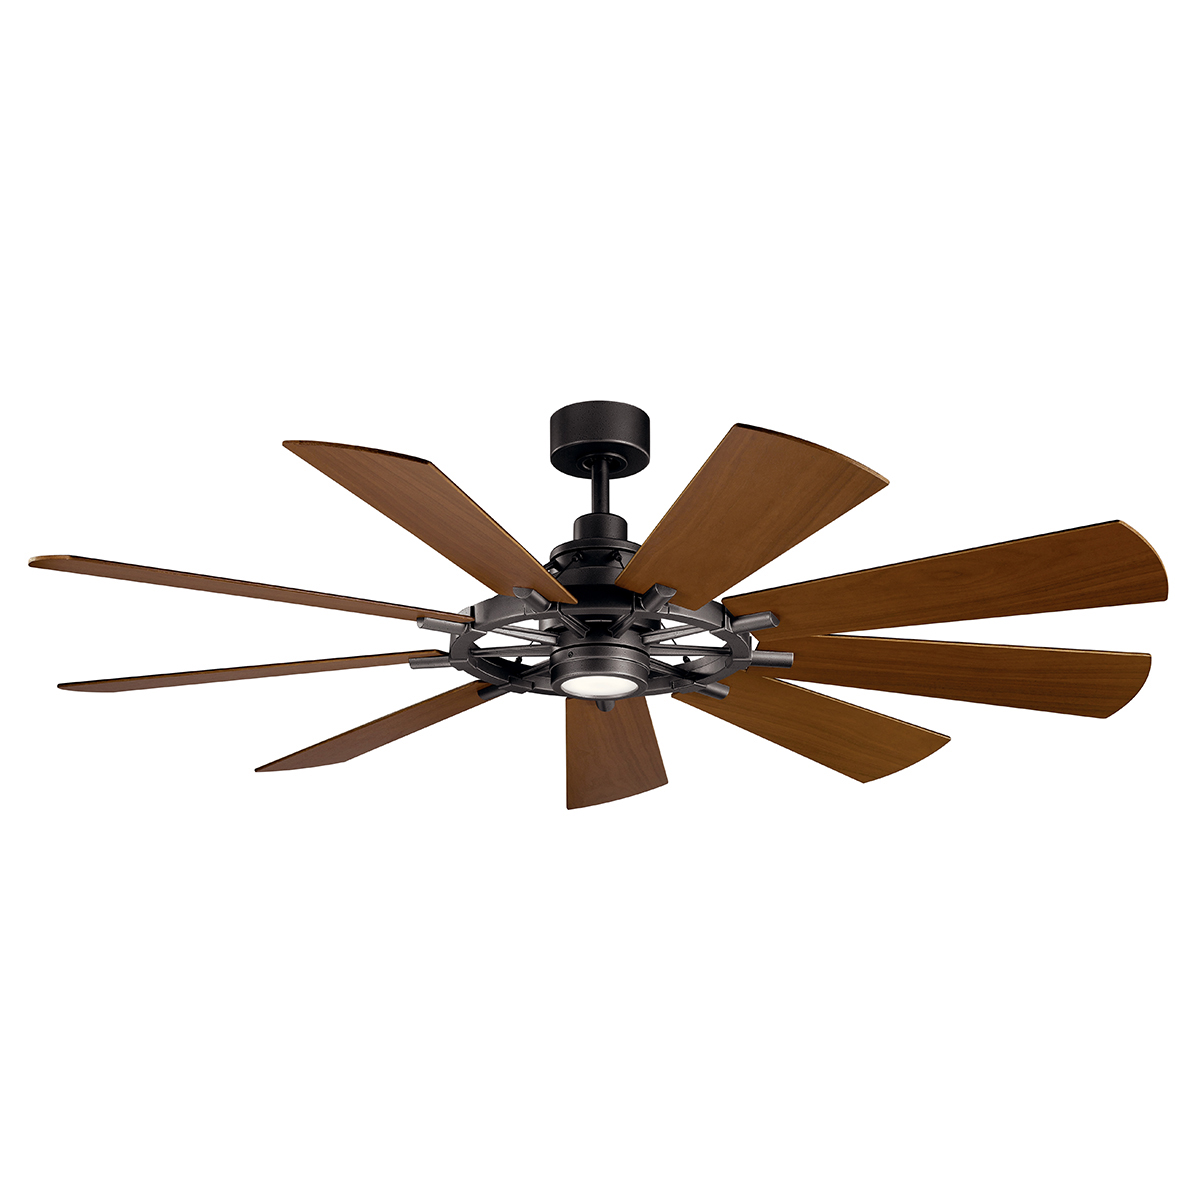 This 65in. LED Gentry ceiling fan knows how to make an impact, both visually and with impressive airflow. The nine-blade design creates a stunning visual effect on or off. The industrial era-inspired Anvil Iron finish provides a style that fits with modern, classic or rustic settings. The LED light source delivers 1,600 lumens of output, about the equivalent of a 150-watt incandescent light bulb, for terrific ambient light.